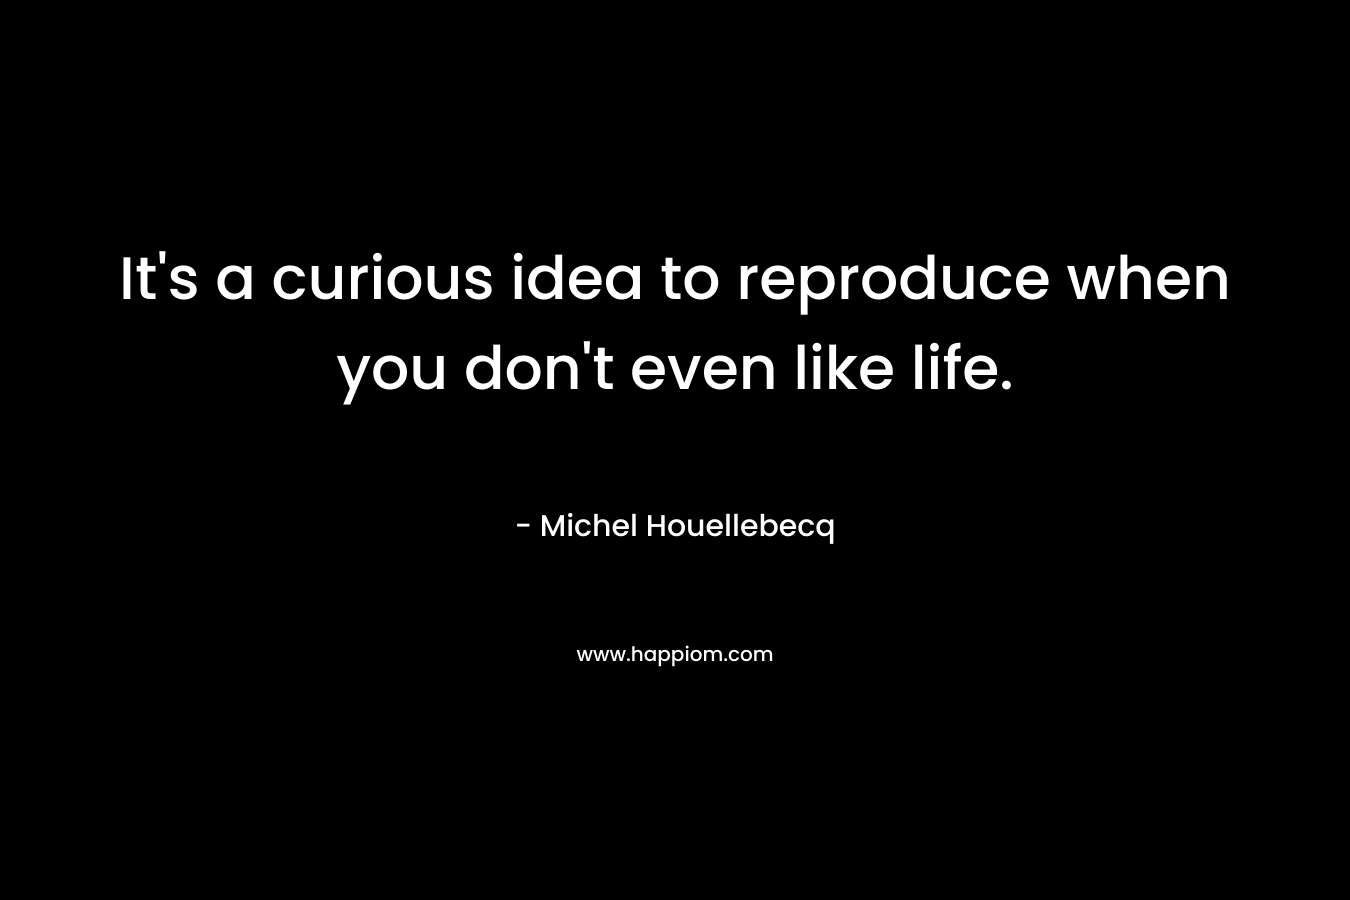 It’s a curious idea to reproduce when you don’t even like life. – Michel Houellebecq